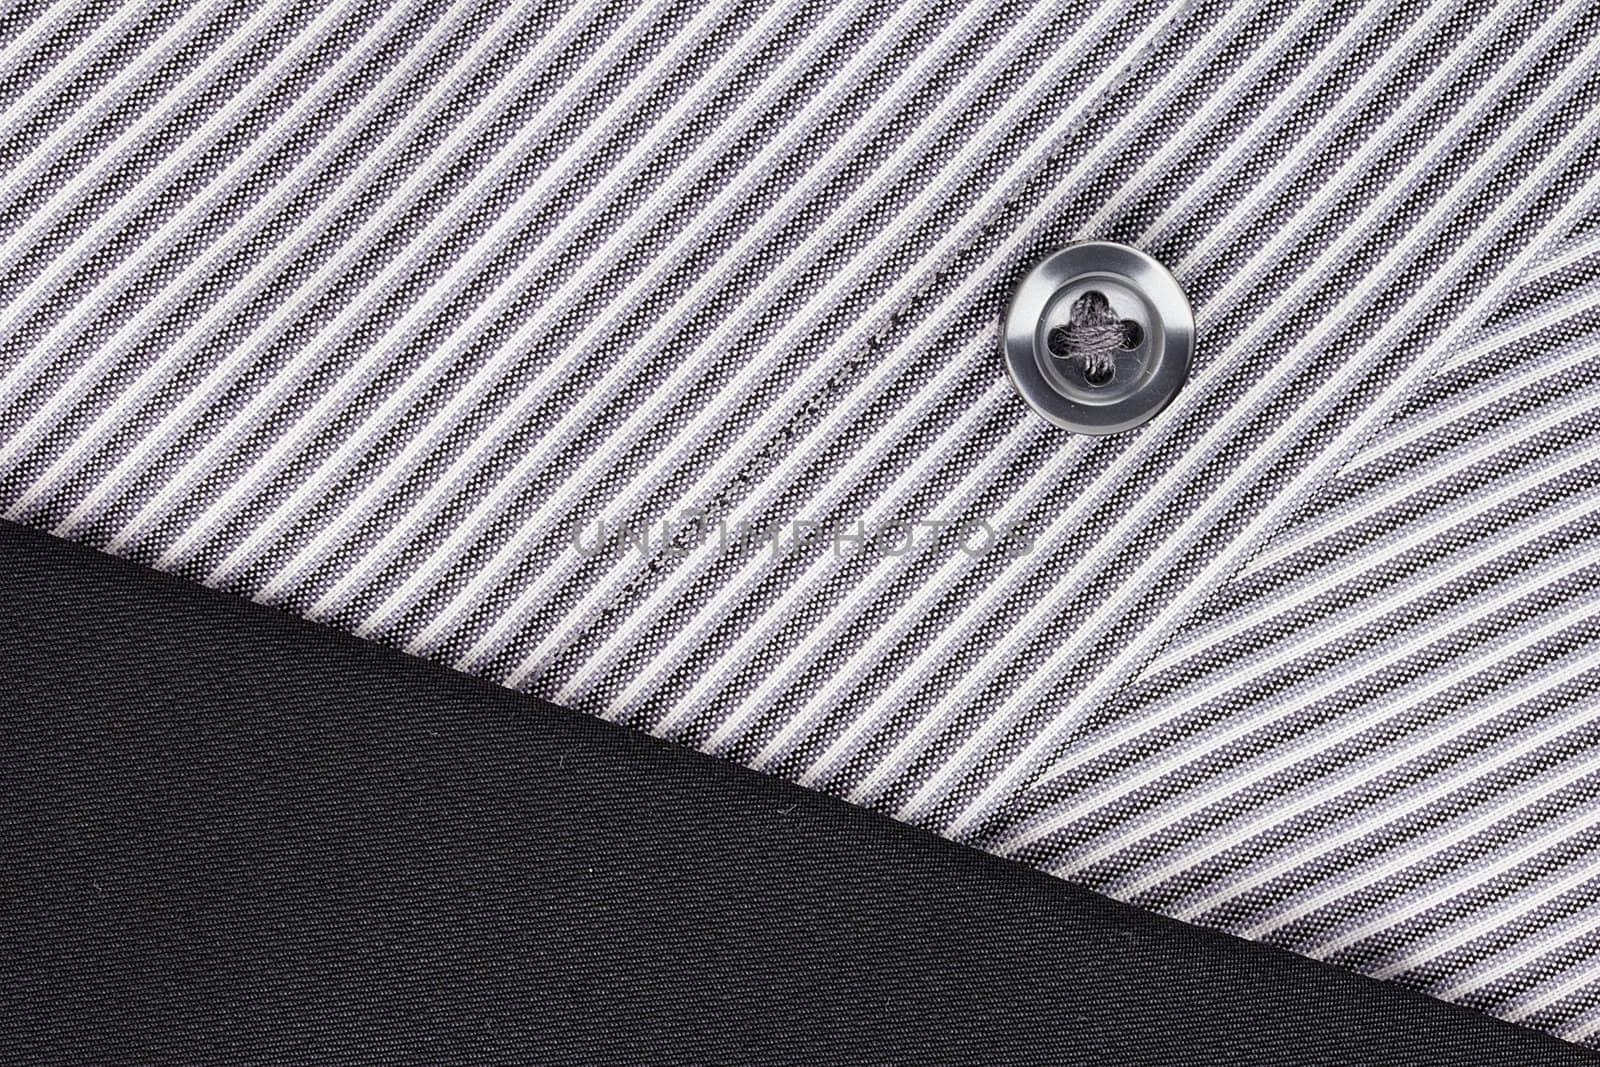 Close-up photograph of a black button on a striped gray pattern.